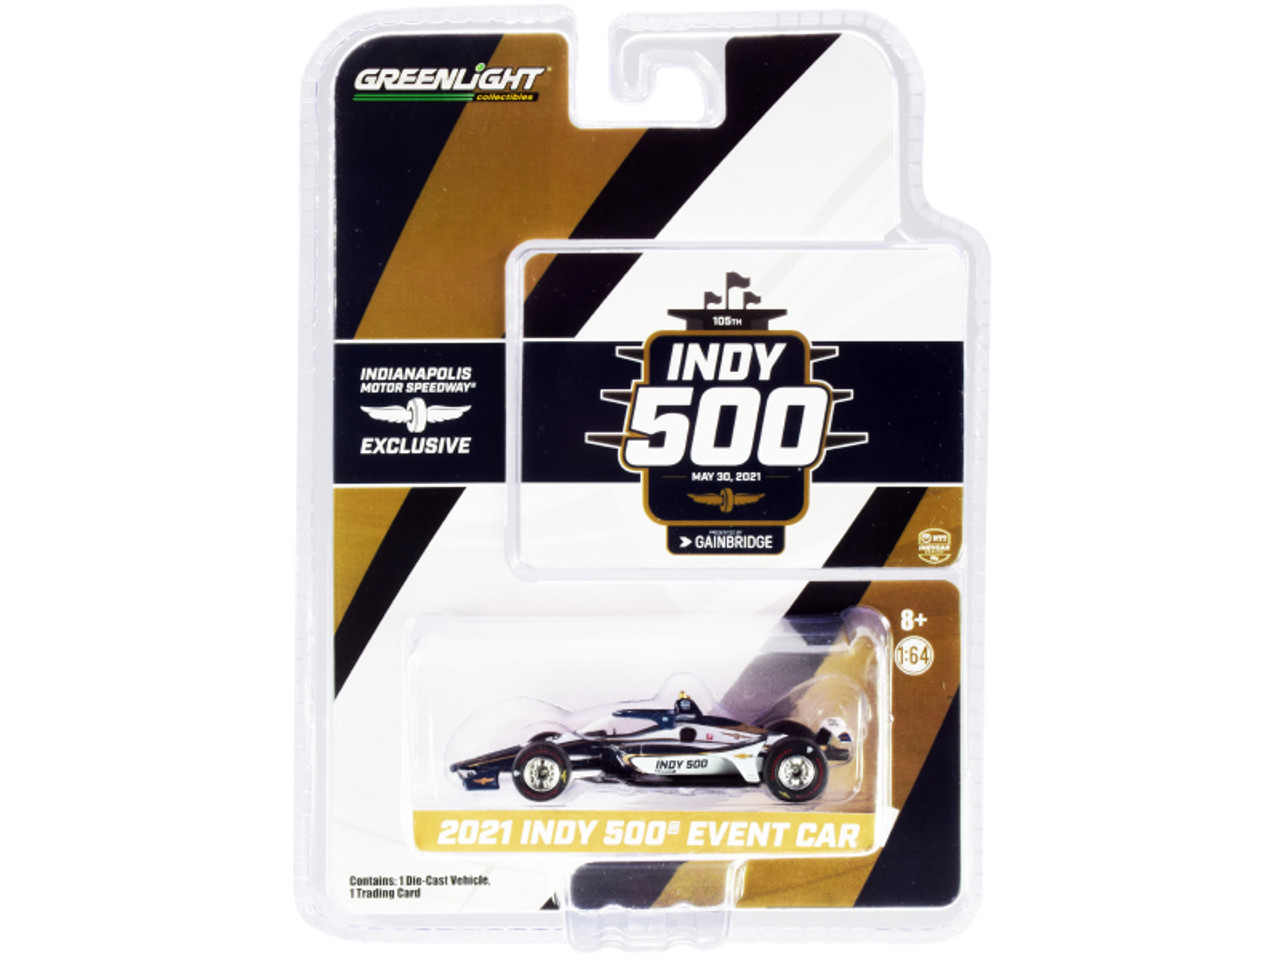 Dallara IndyCar Event Car "105th Running of the Indianapolis 500" (2021) 1/64 Diecast Model Car by Greenlight